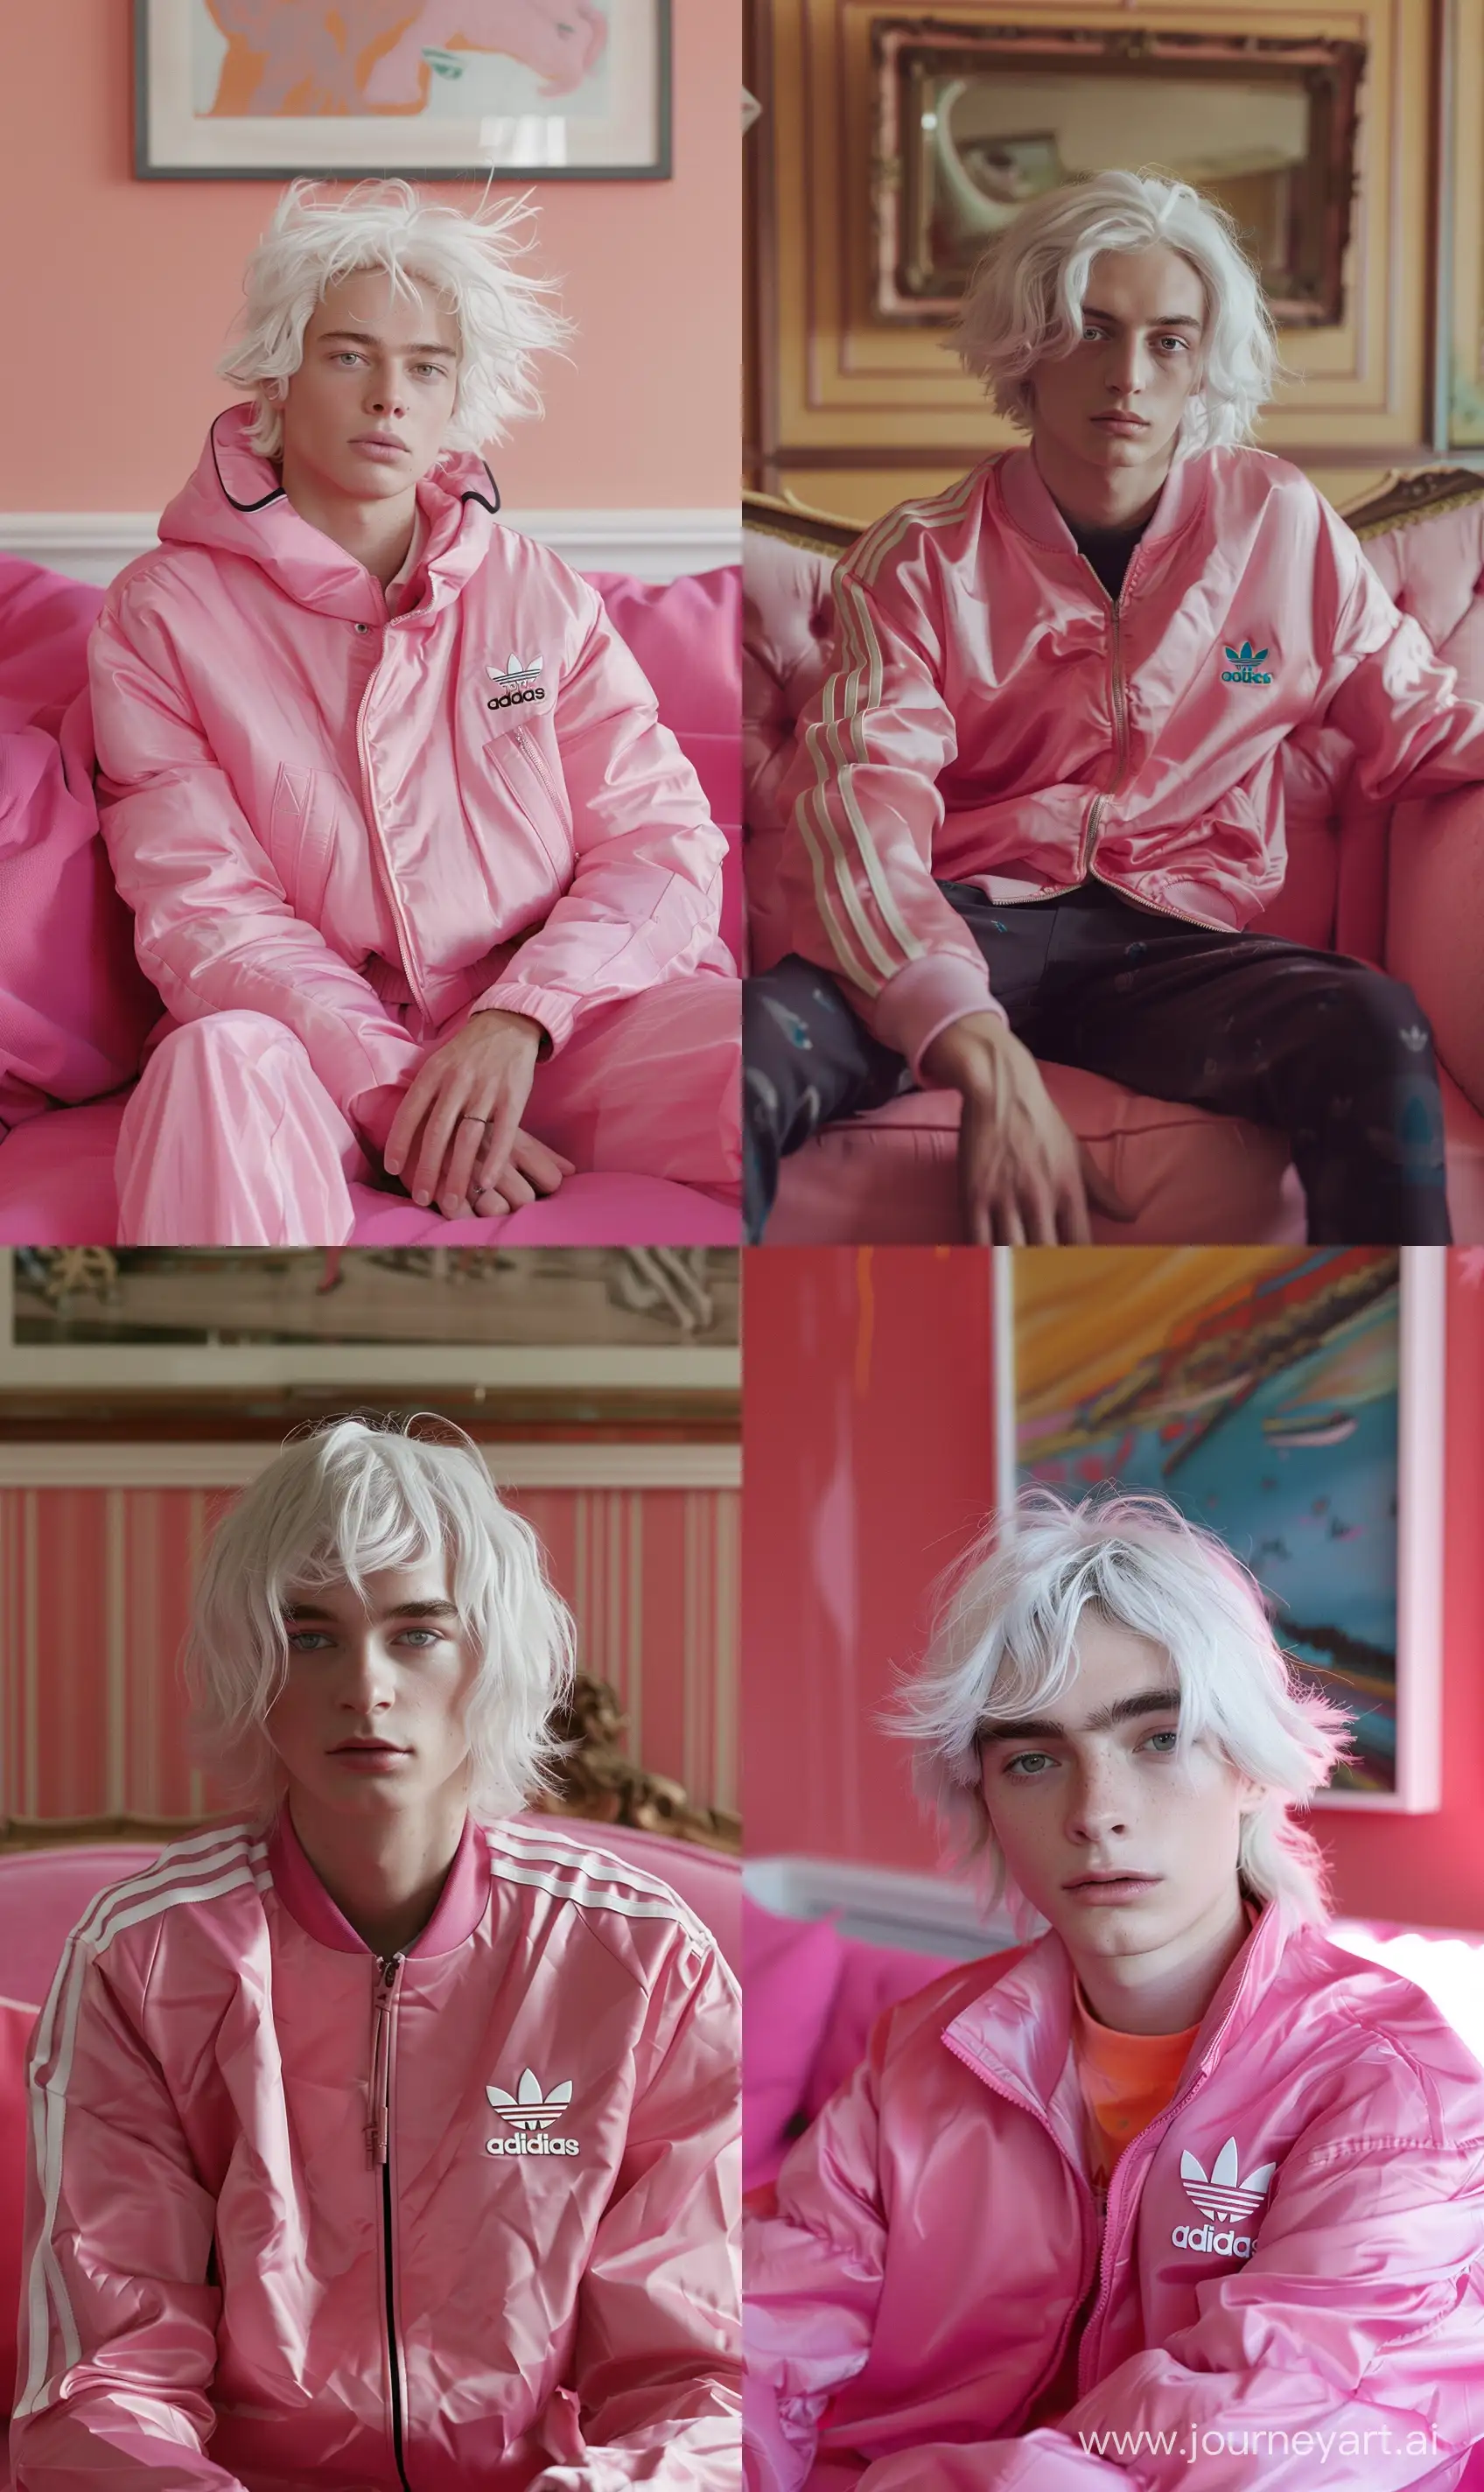 A portrait of a  Tom Riddle with white hair, sitting on a pink couch, in the style of Wes Anderson. He is wearing a pink jacket designed by Adidas Originals. The image features professional color grading to enhance the vibrant hues and create a visually striking composition. --ar 3:5 --v 6.0